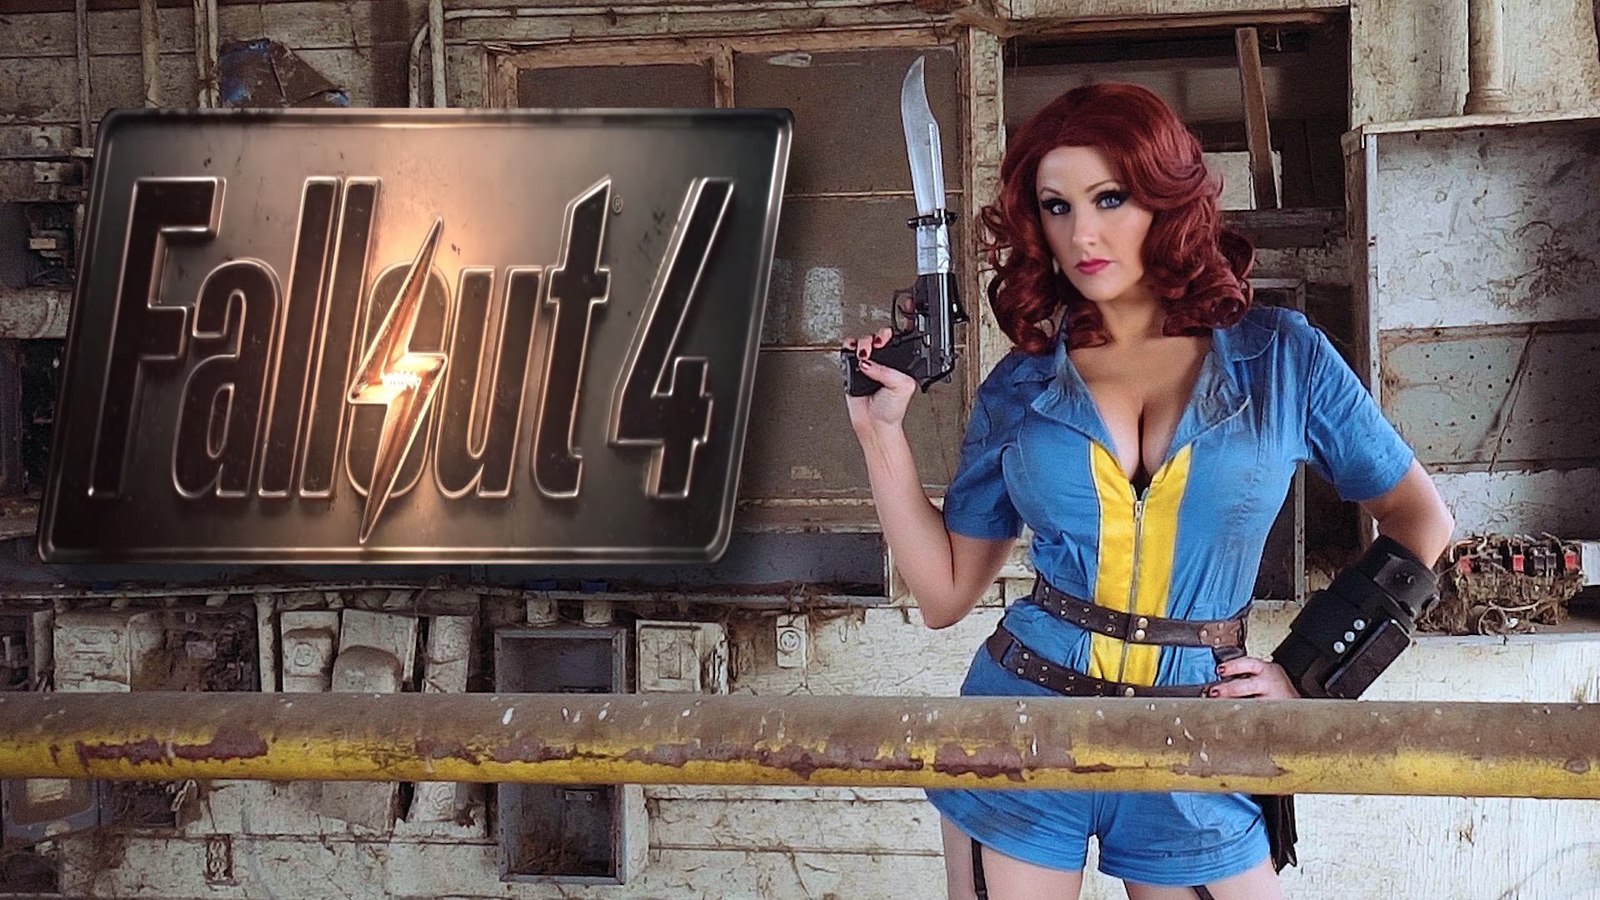 Uncover your death claw - Games, Fallout, Female cosplay, Cosplay, Longpost, Booty, Sexuality, Boobs